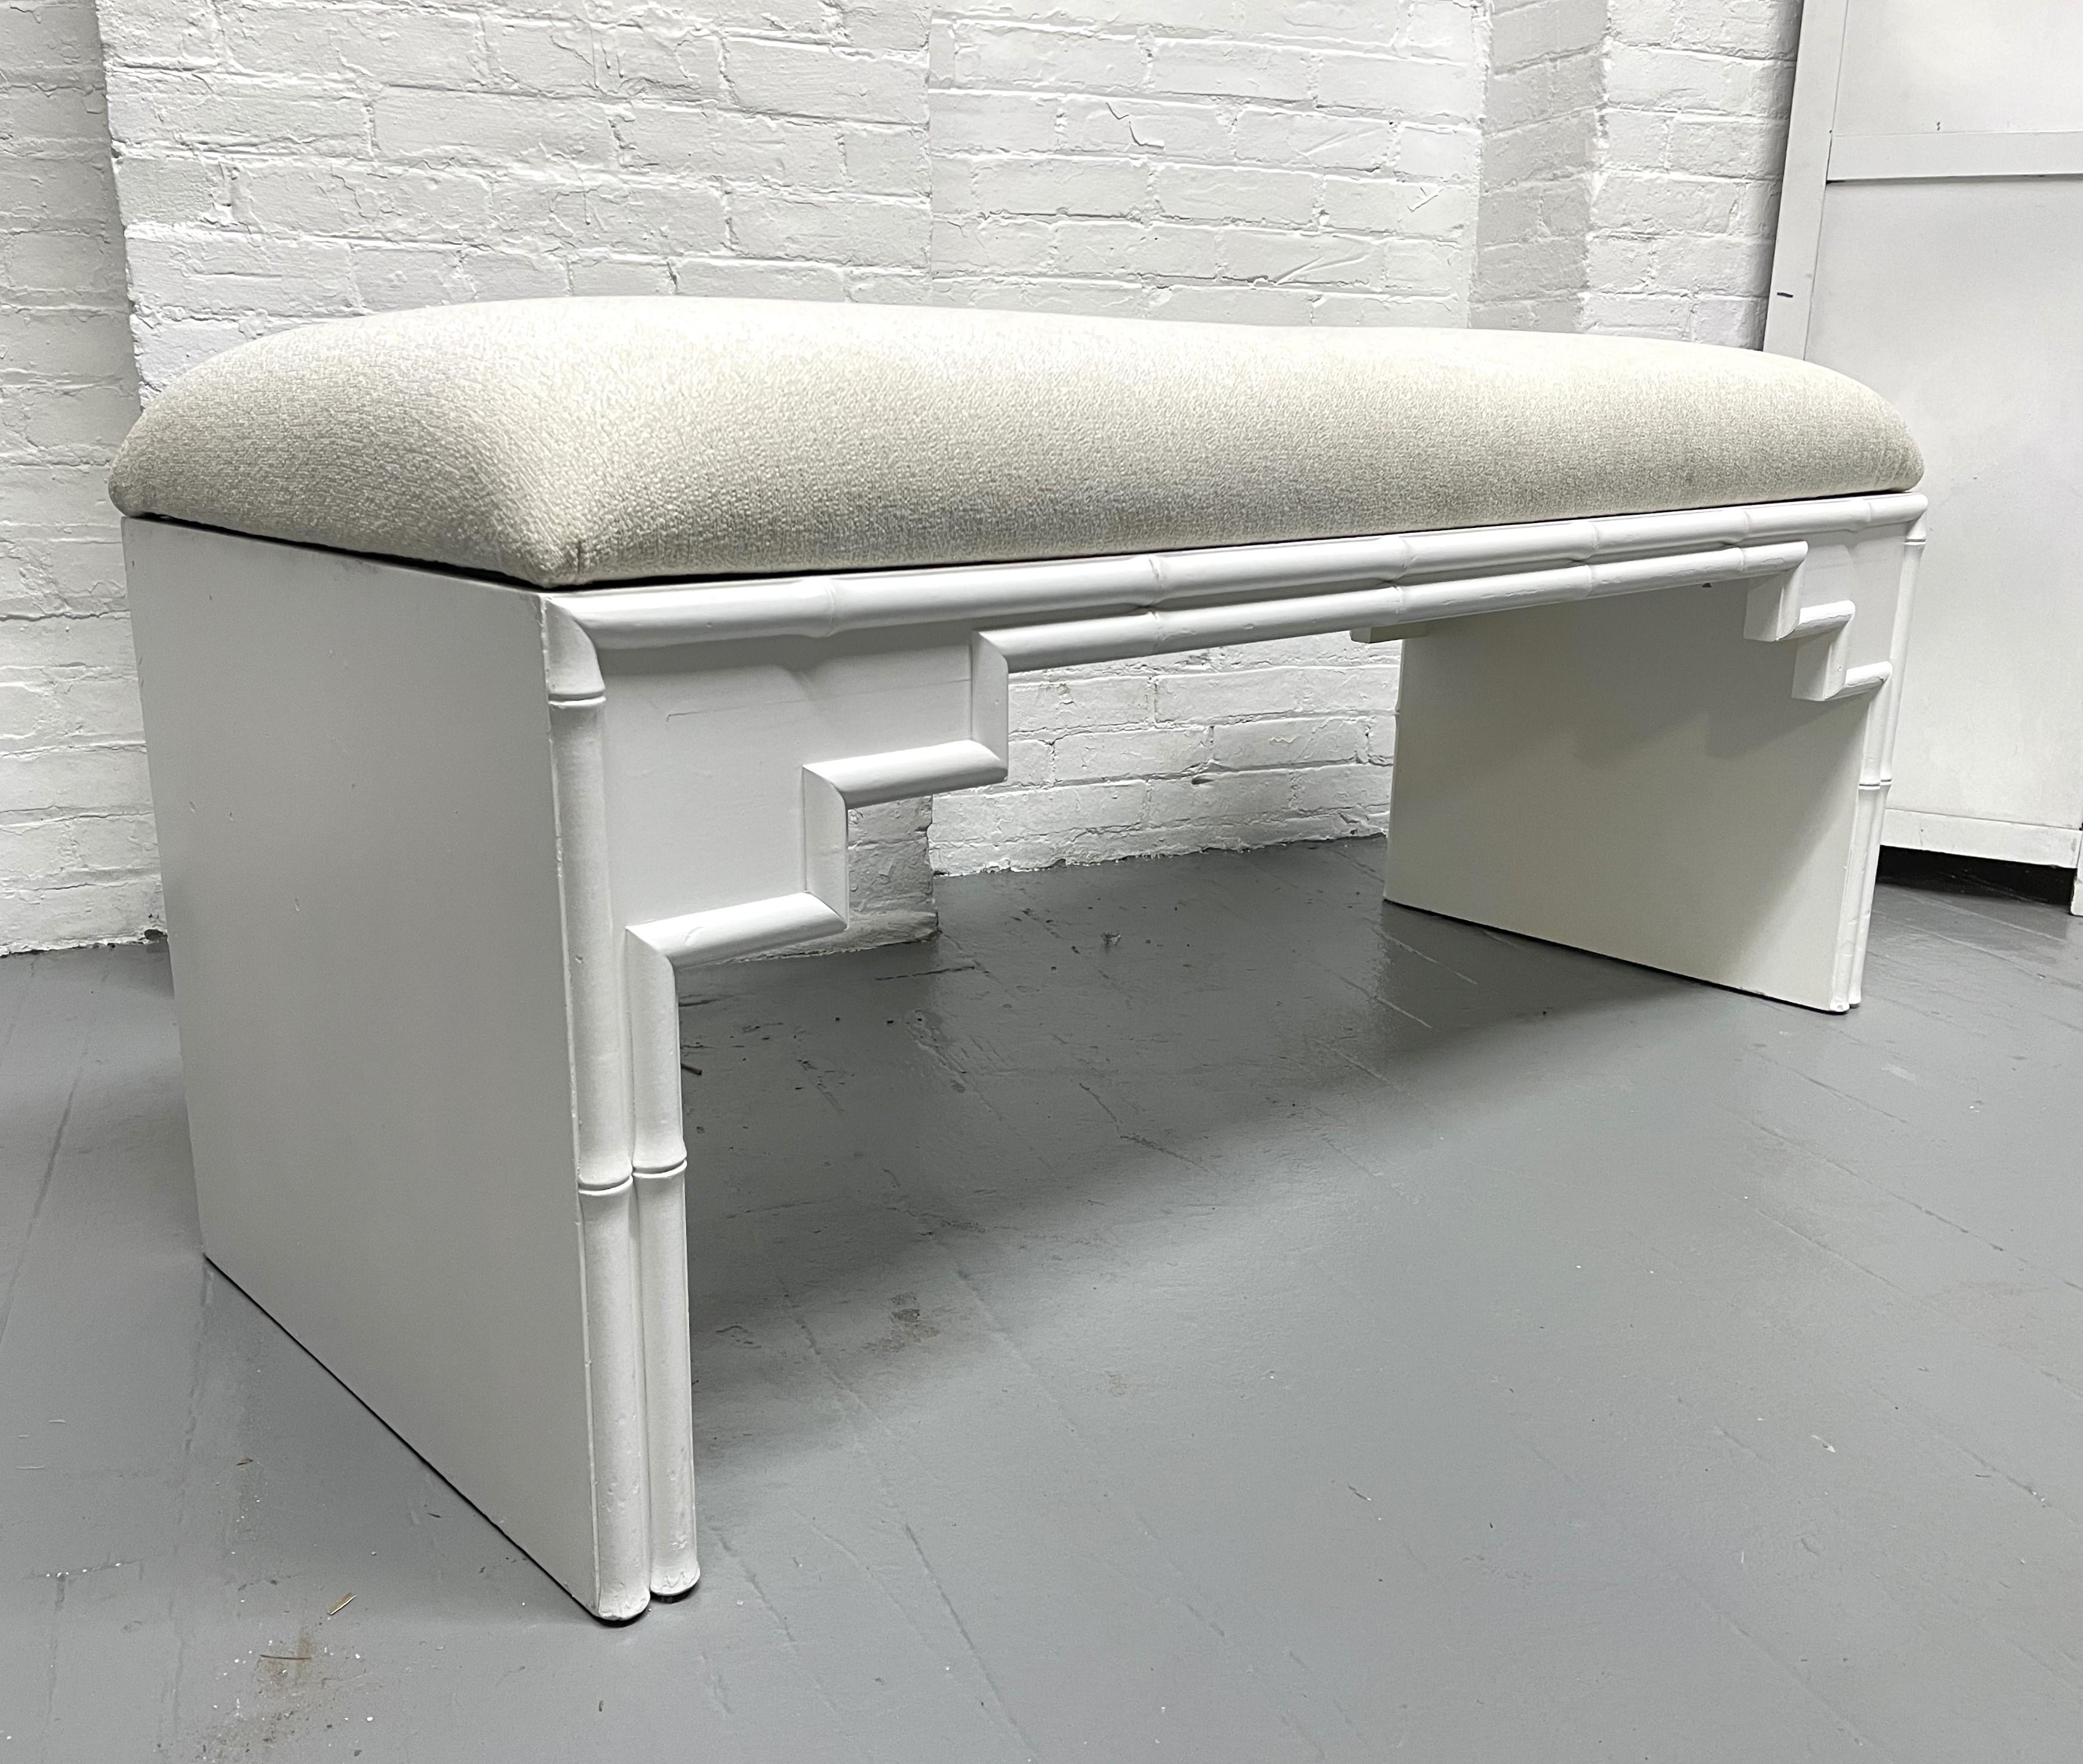 Hollywood Regency faux bamboo upholstered bench. The frame of the bench is wood with a white painted finish and faux bamboo trimming to the front and rear.